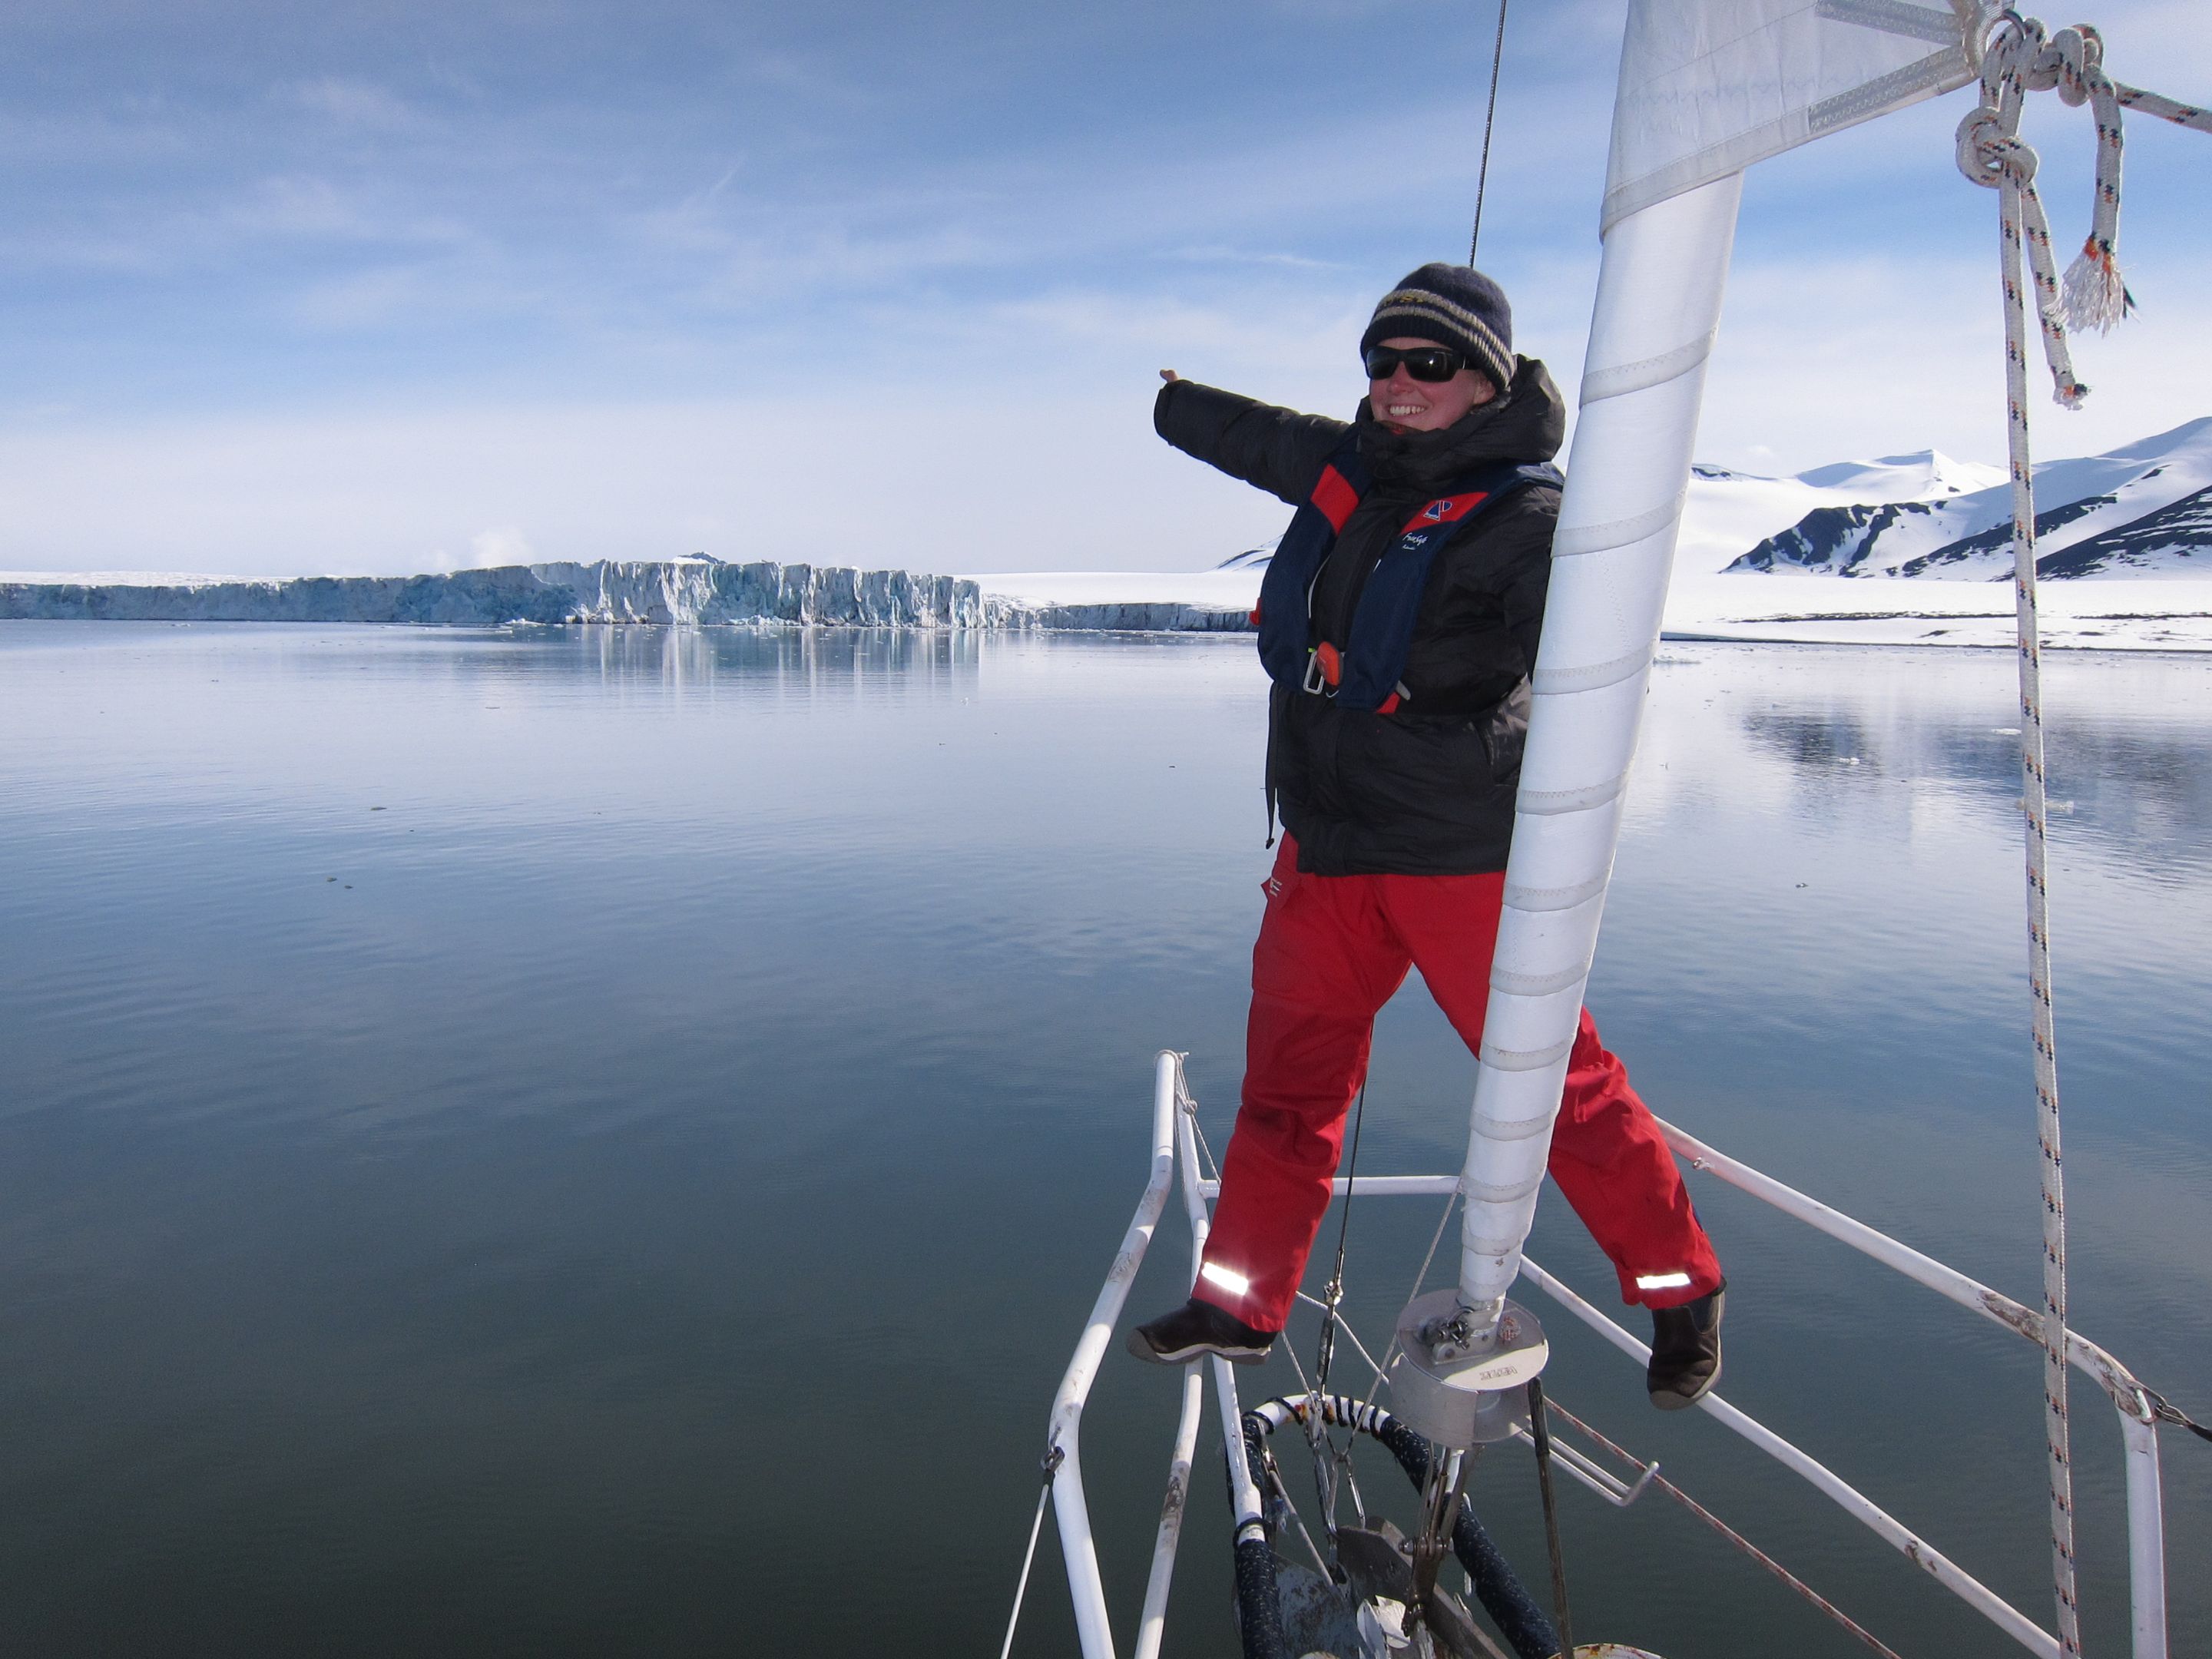 Dr Leonie Suter sailing in Svalbard, one of the world’s northernmost inhabited areas. She stands at the bow of the yacht, pointing out towards an iceberg in the water 